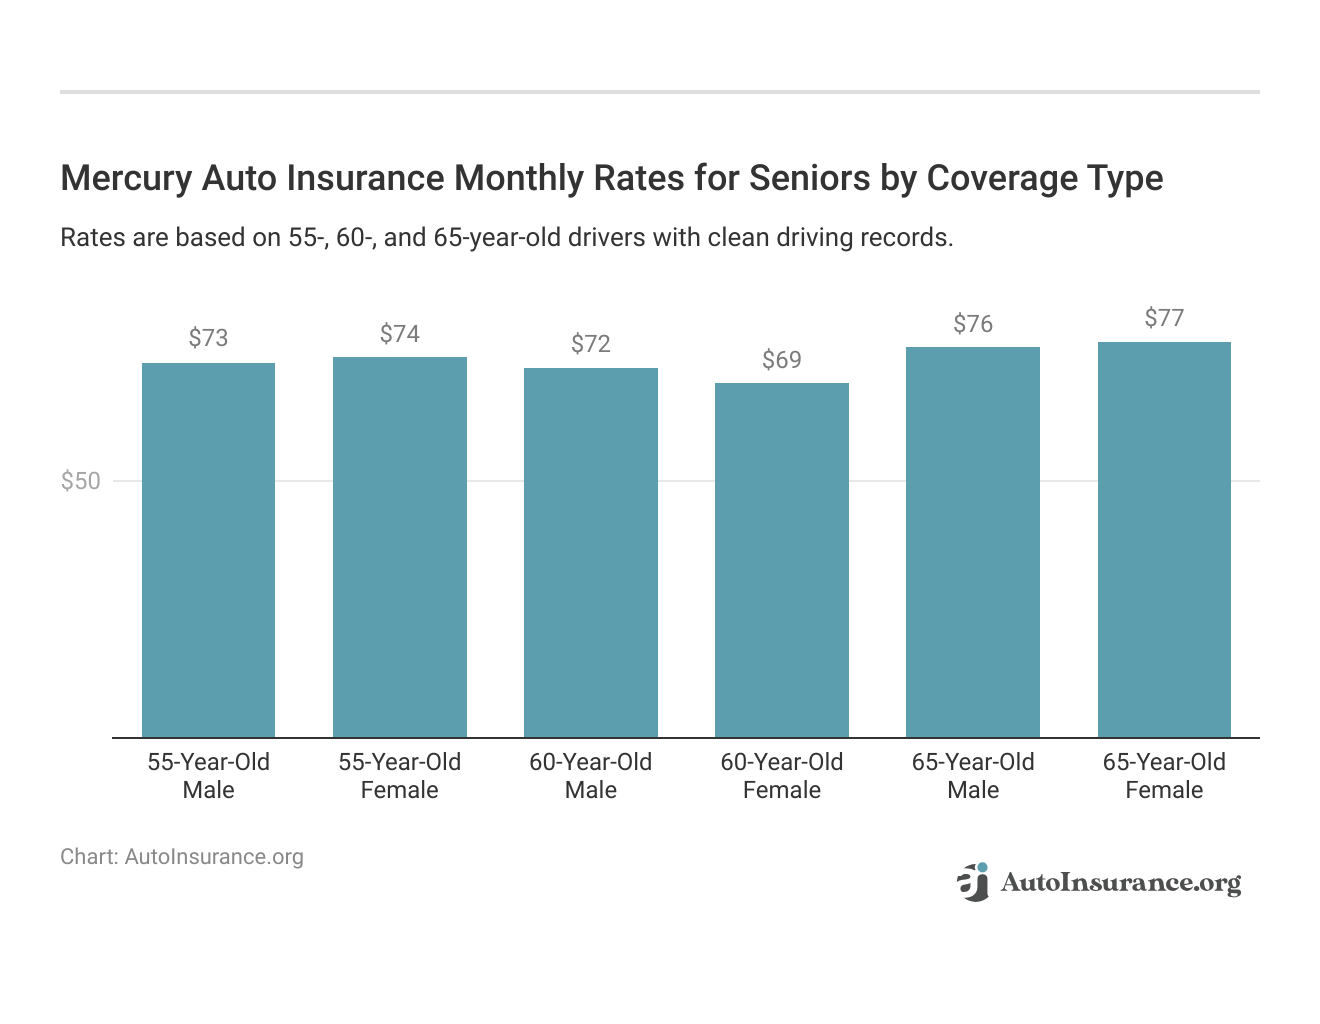 <h3>Mercury Auto Insurance Monthly Rates for Seniors by Coverage Type</h3>